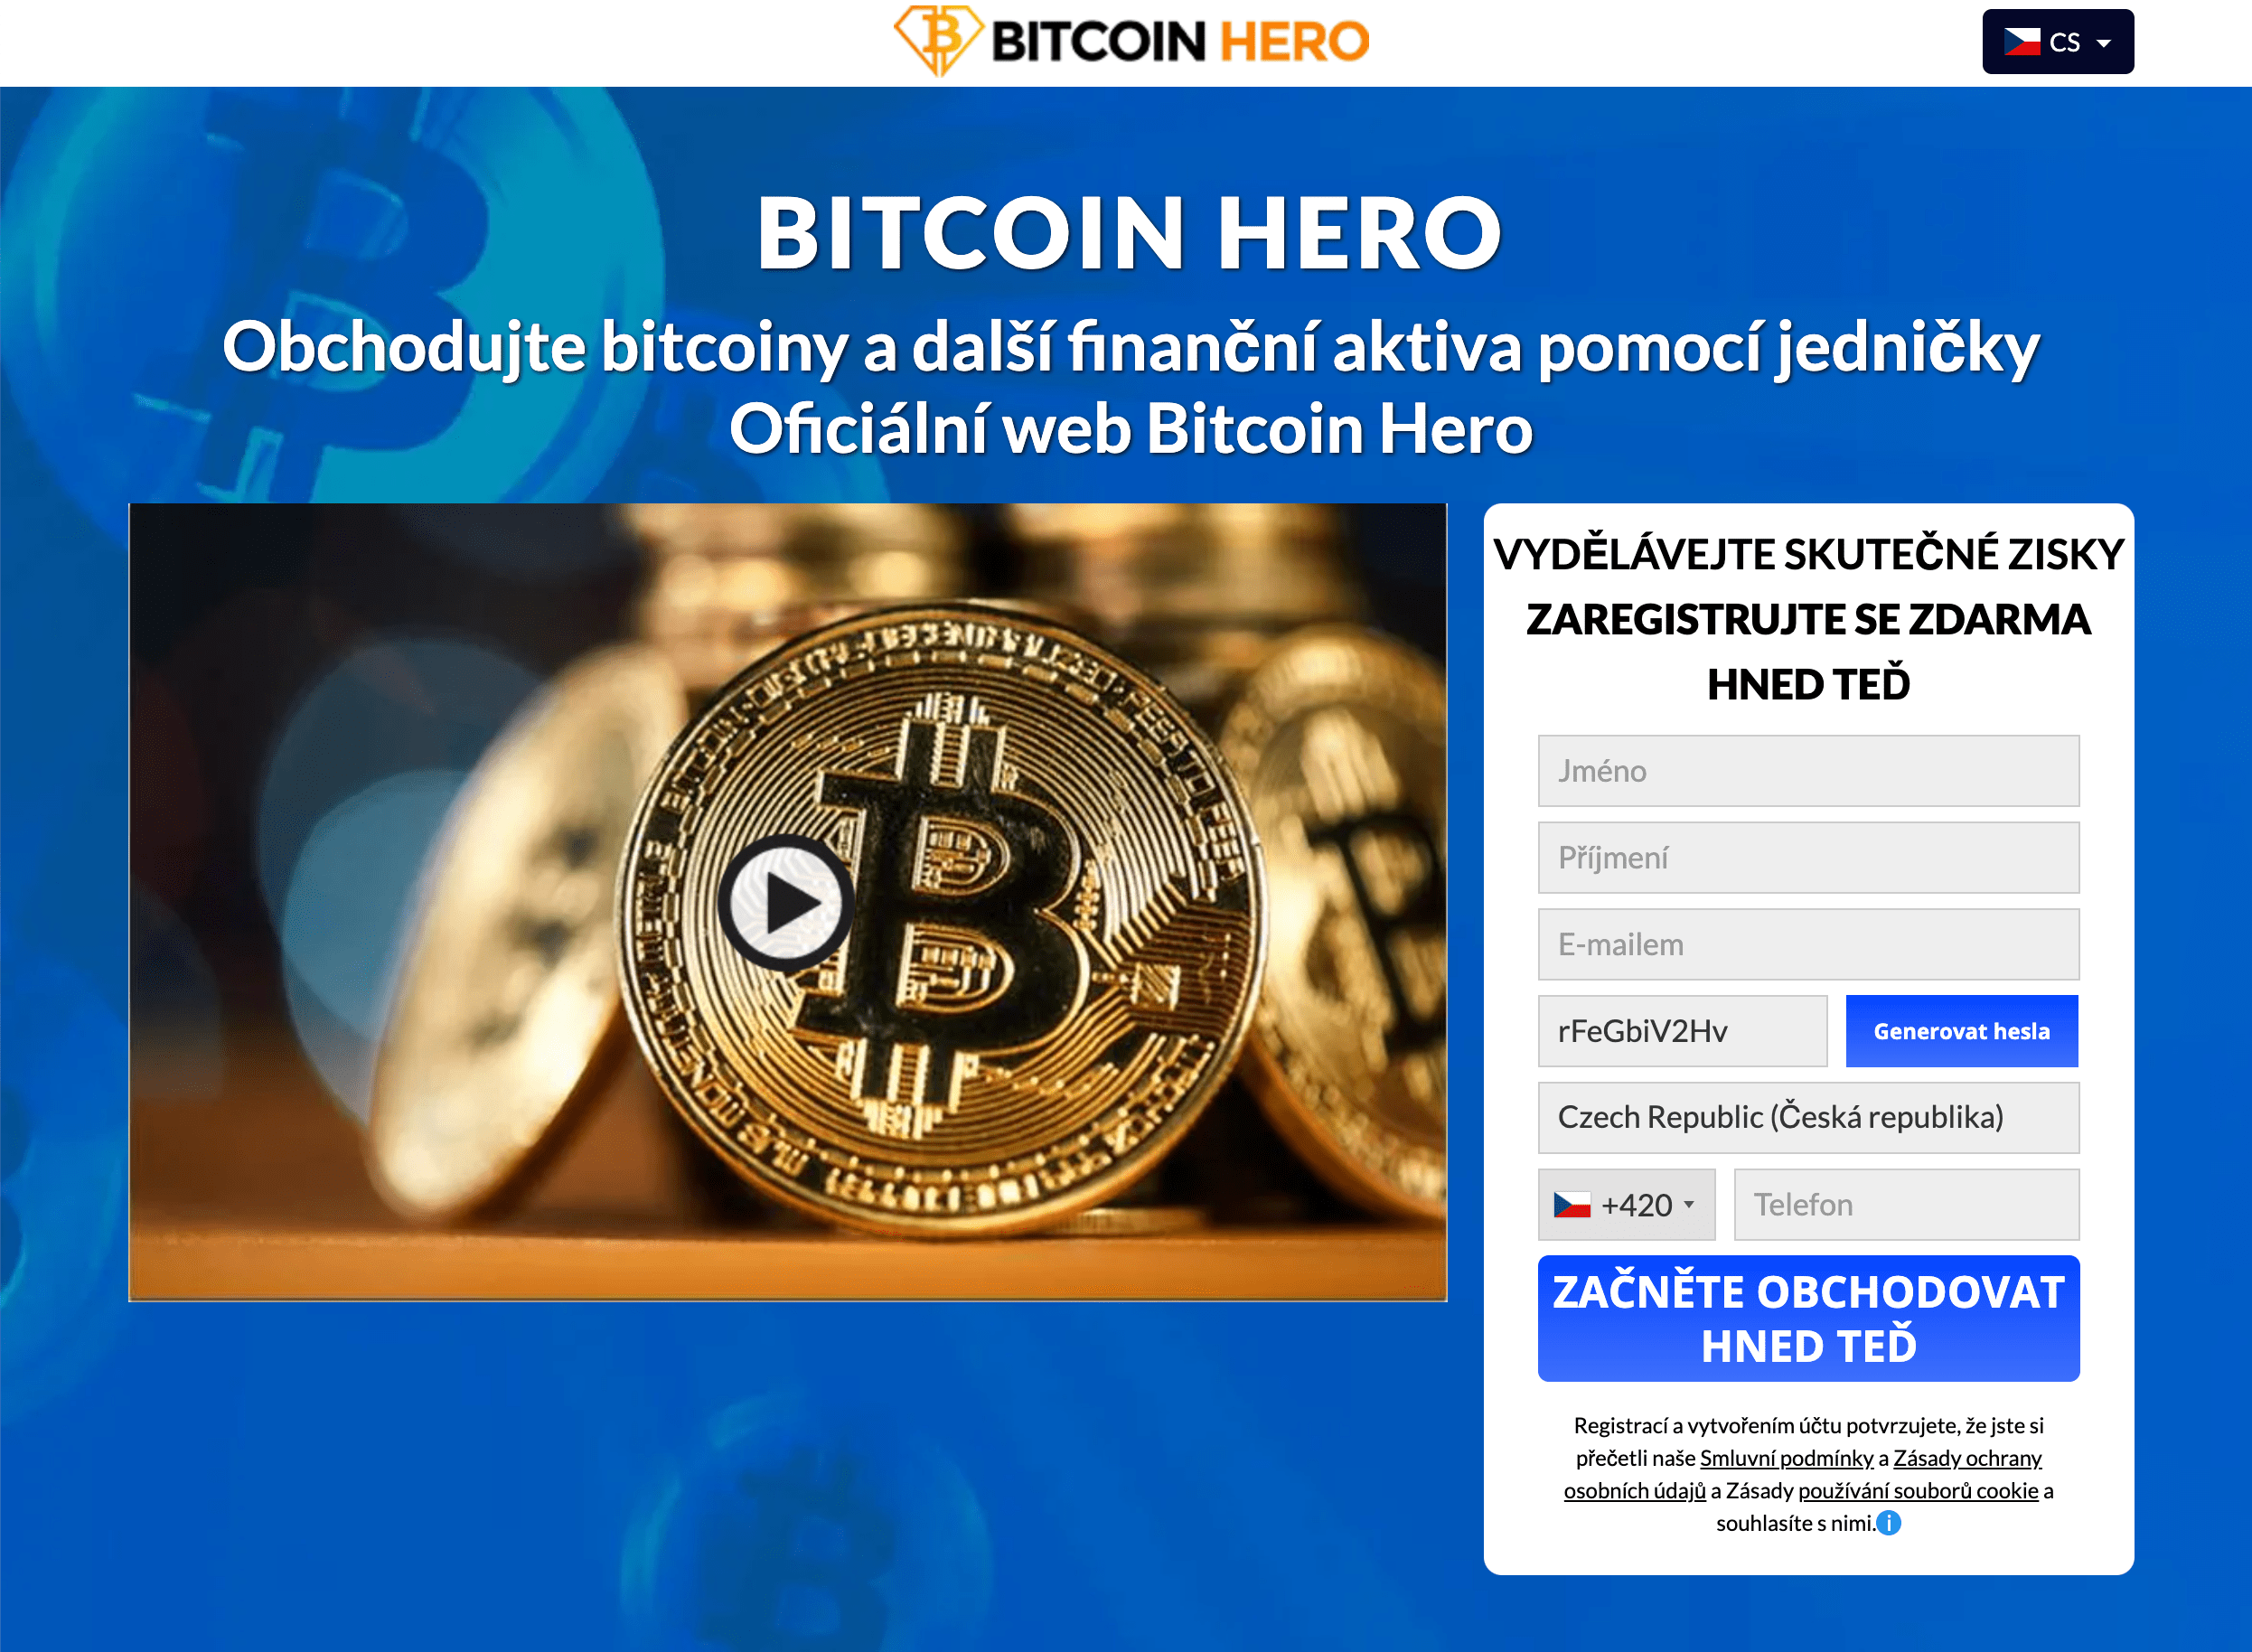 Cash For Bitcoin Benefit